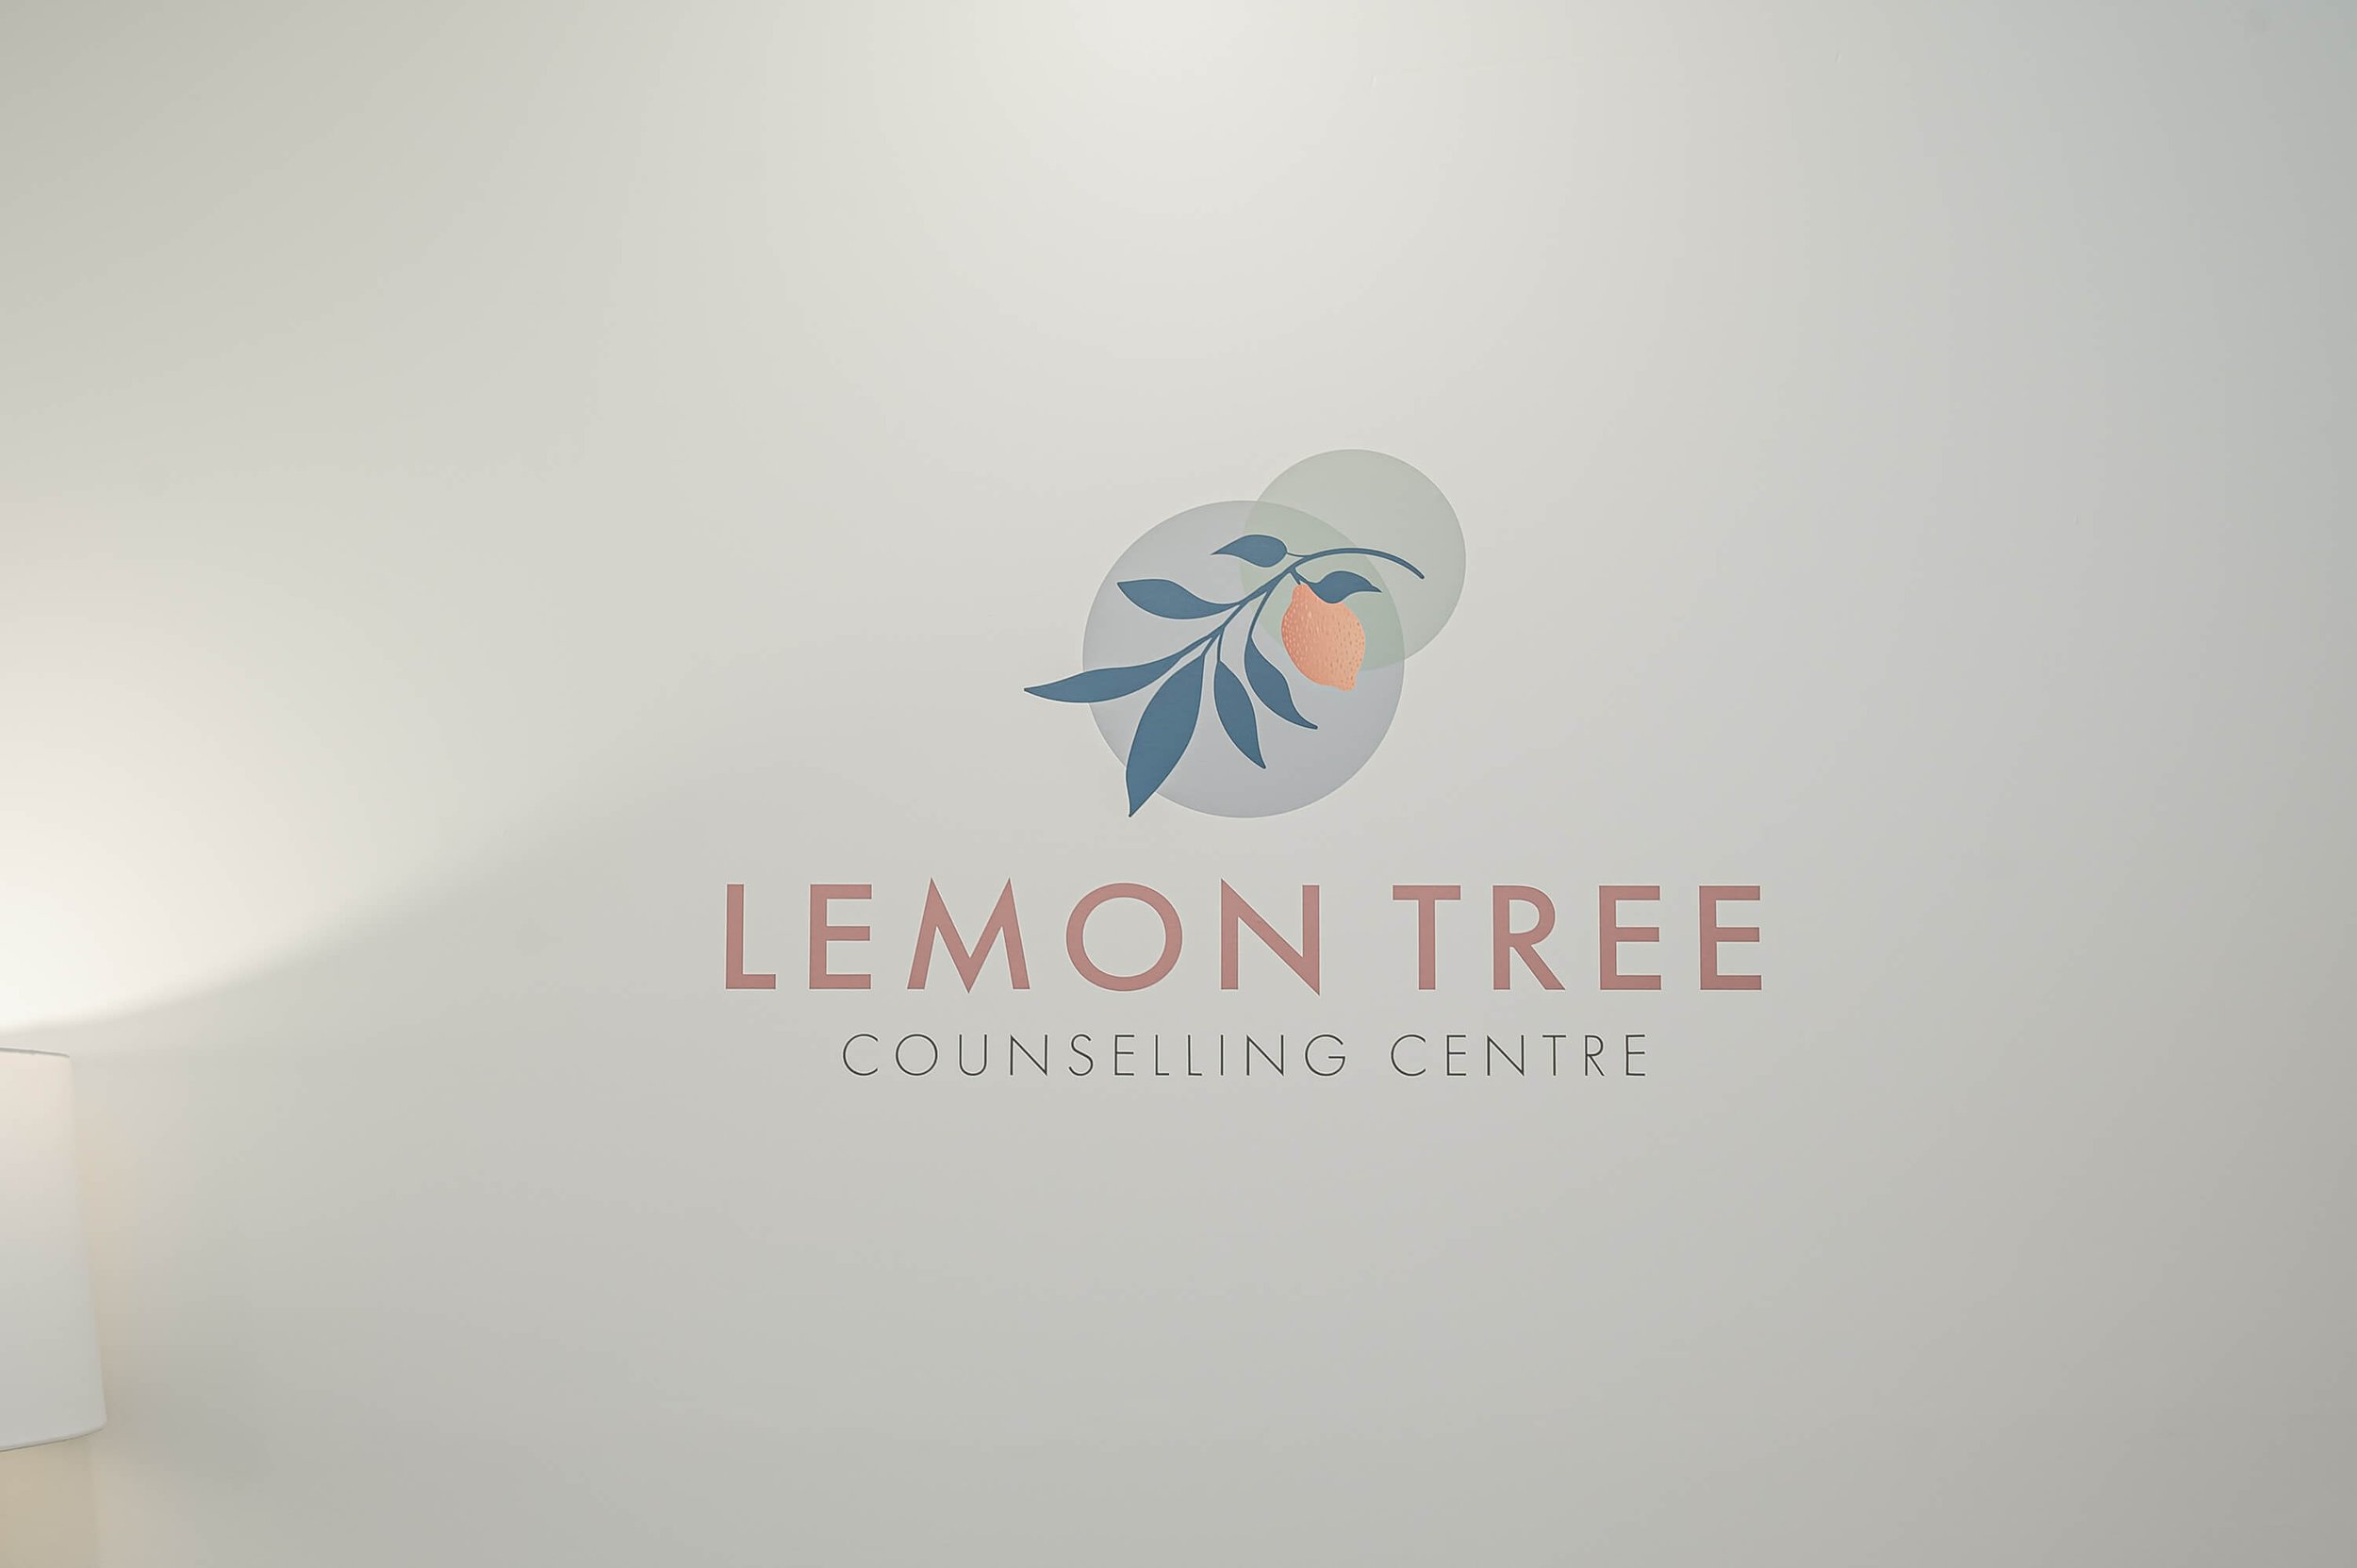 Lemon Tree Counselling Centre - Logo on the waiting room wall.jpg